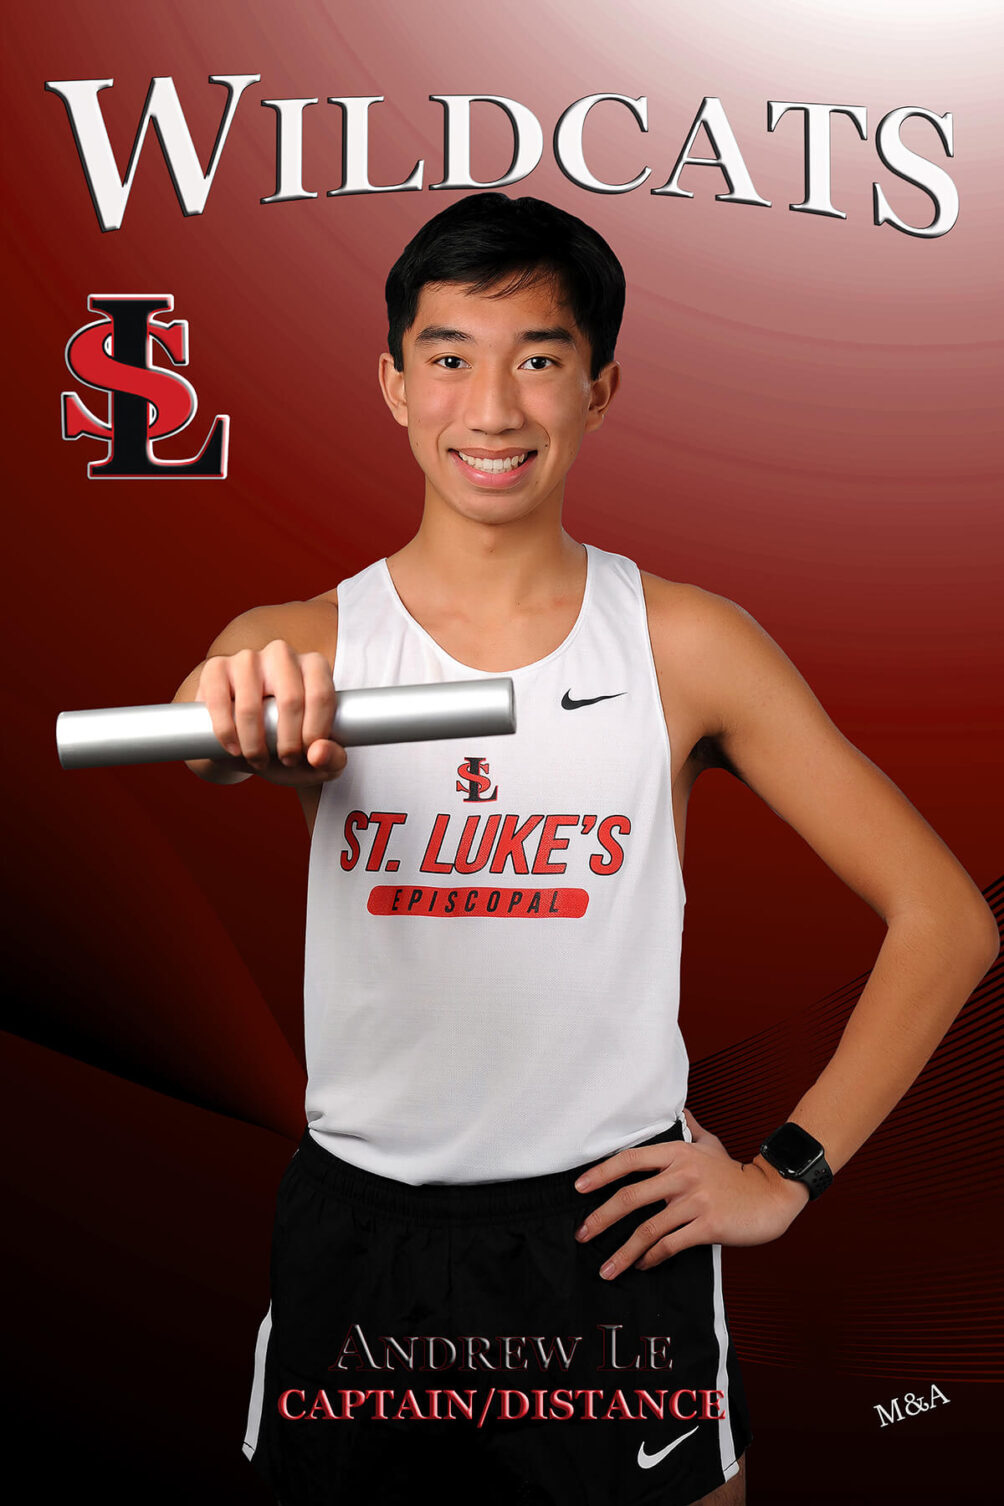 Andrew Le's track banner